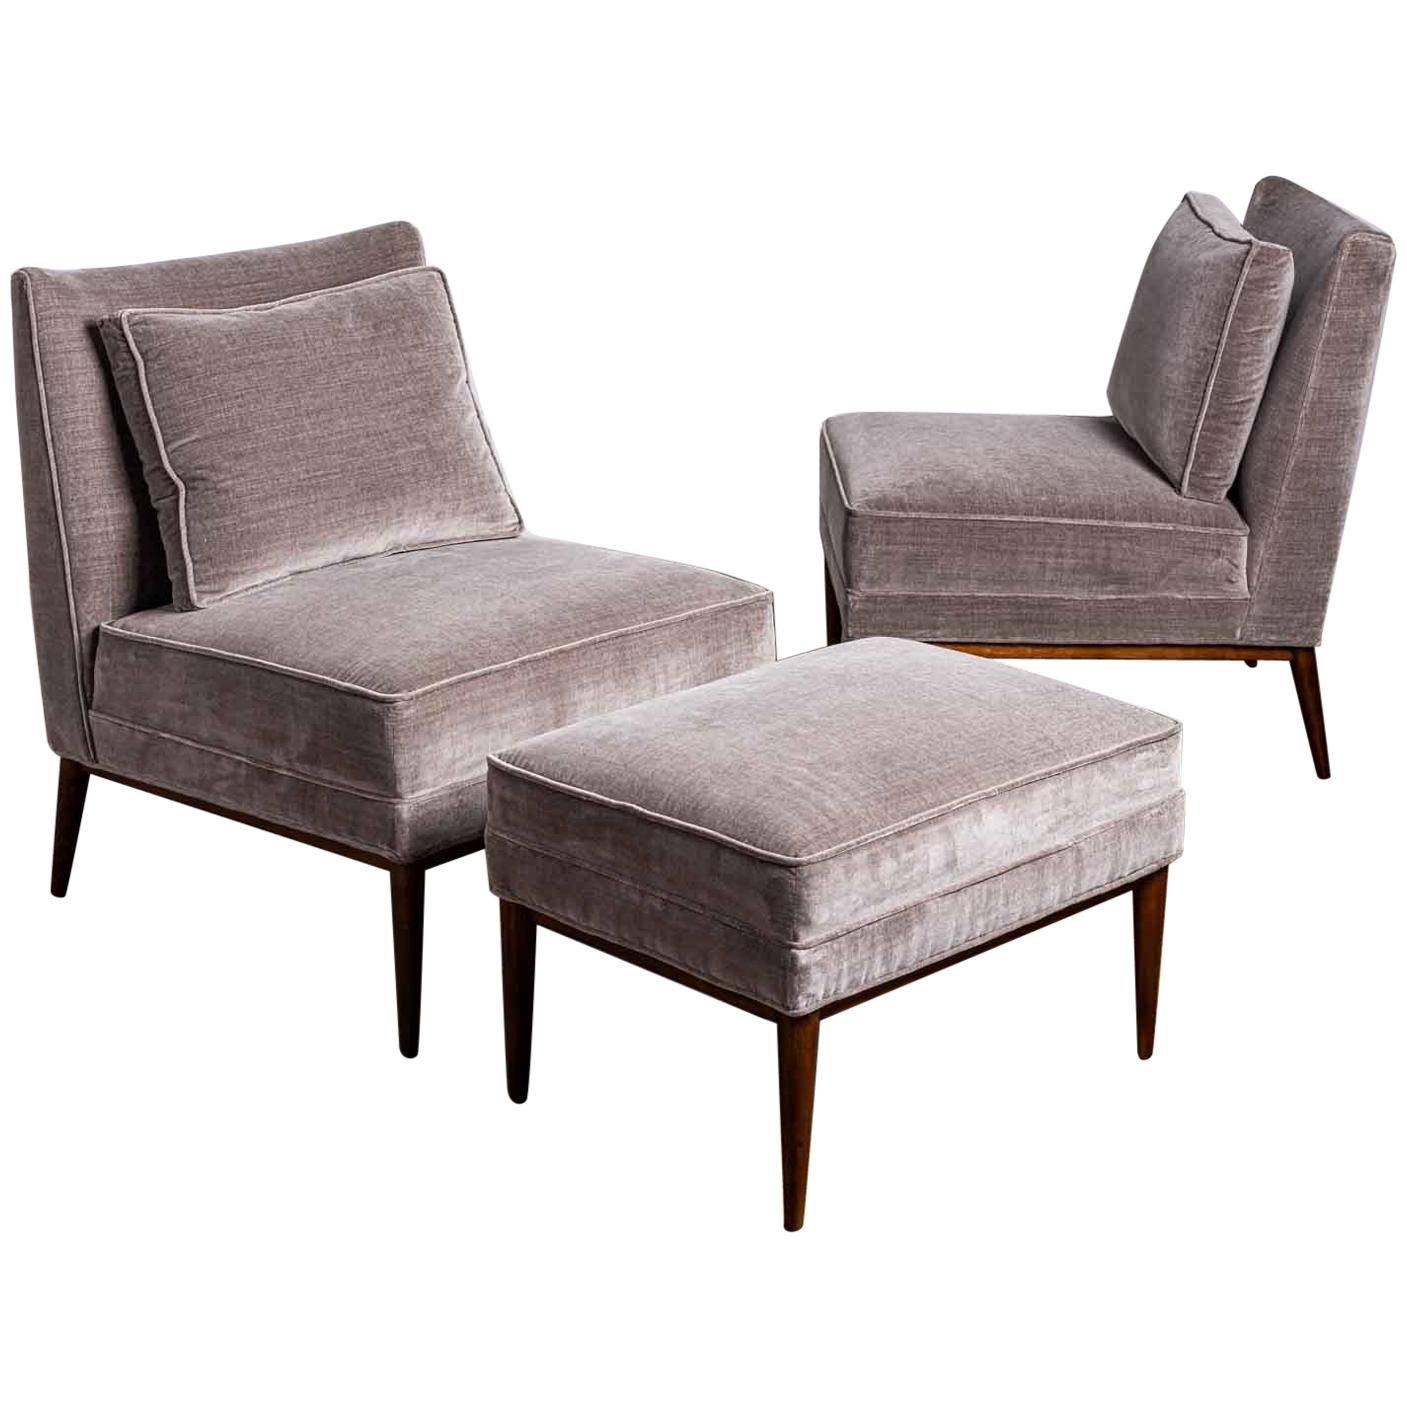 Pair of Slipper Chairs and Ottoman by Paul McCobb